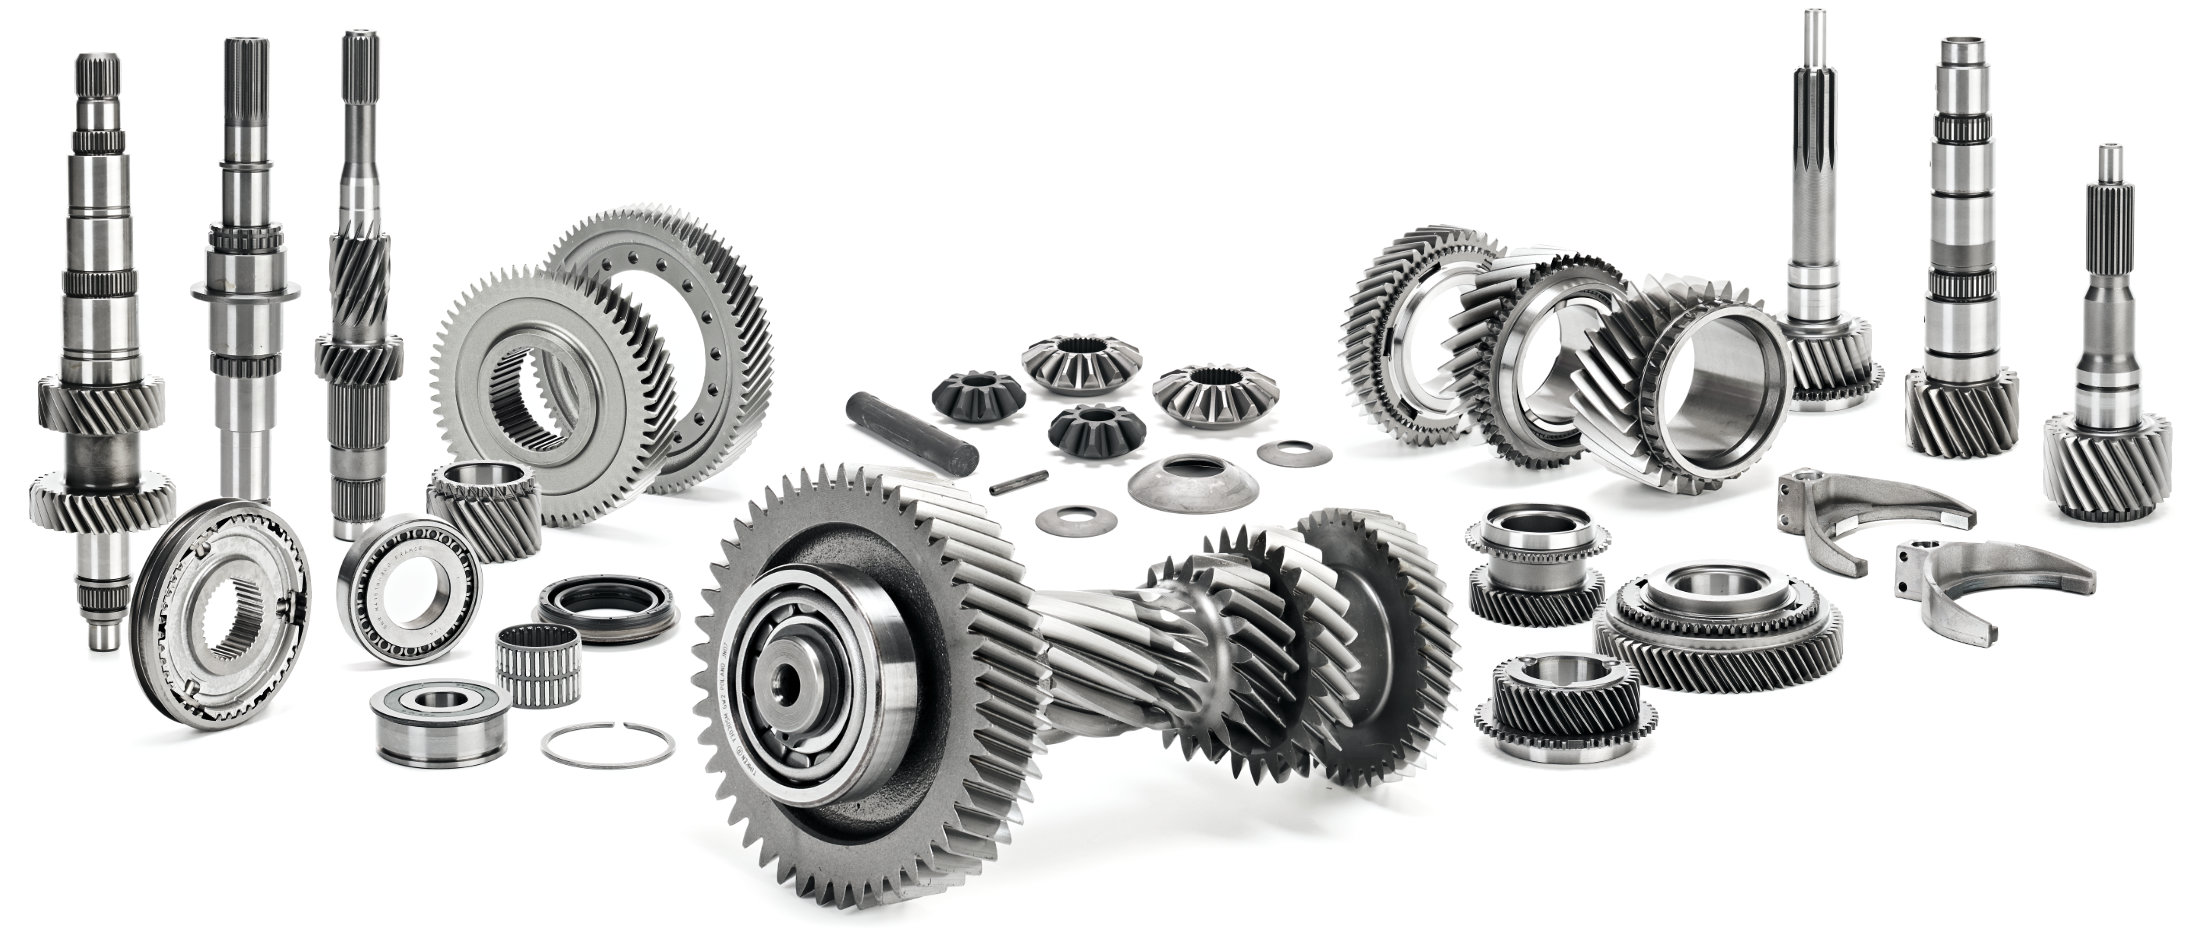 Gearbox spare parts for trucks, commercial vehicles and buses